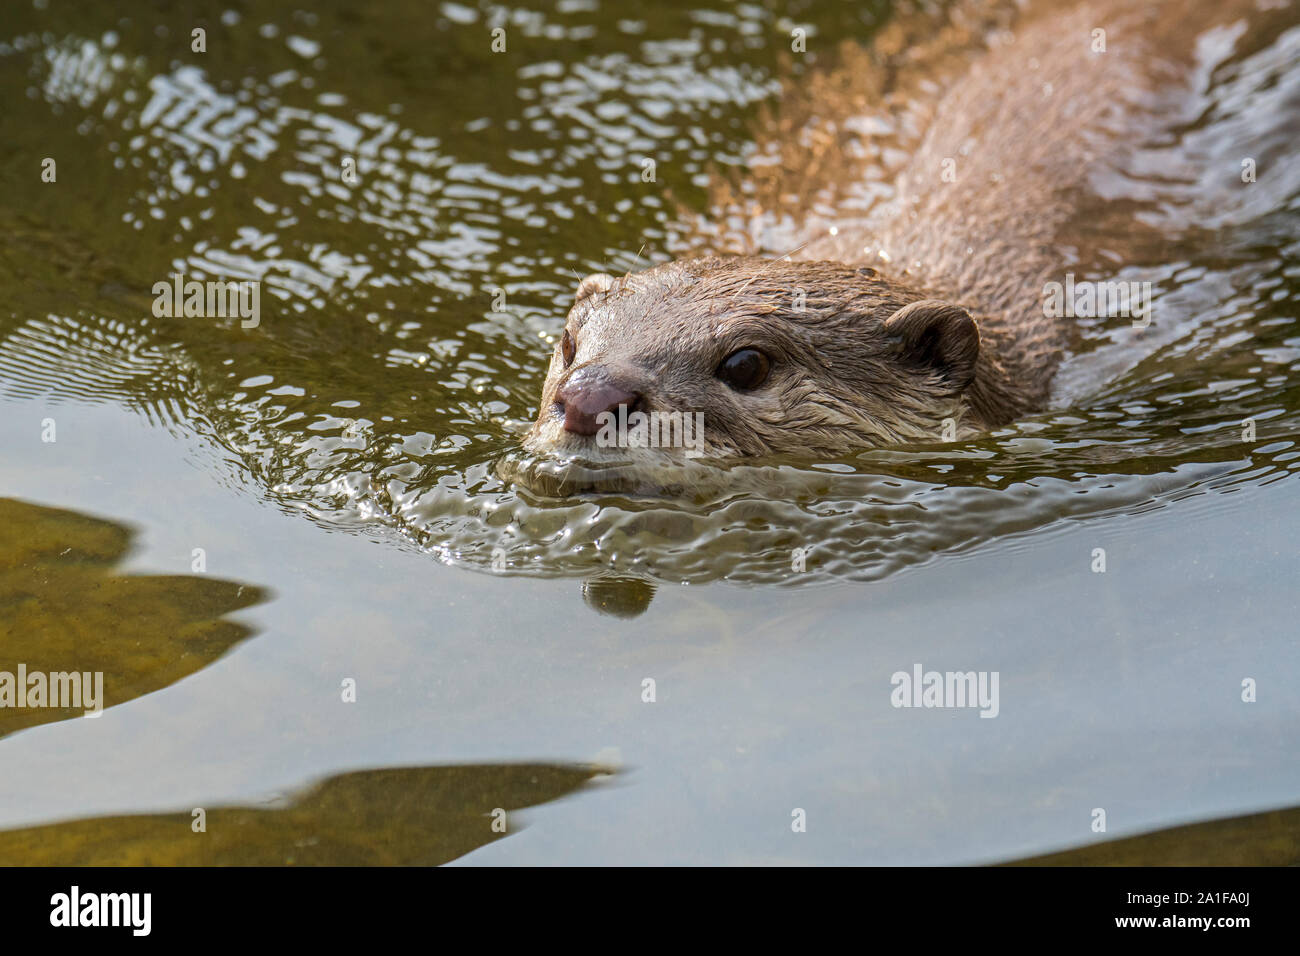 Smooth-coated otter (Lutrogale perspicillata / Lutra perspicillata) swimming, native to the Indian subcontinent and Southeast Asia Stock Photo